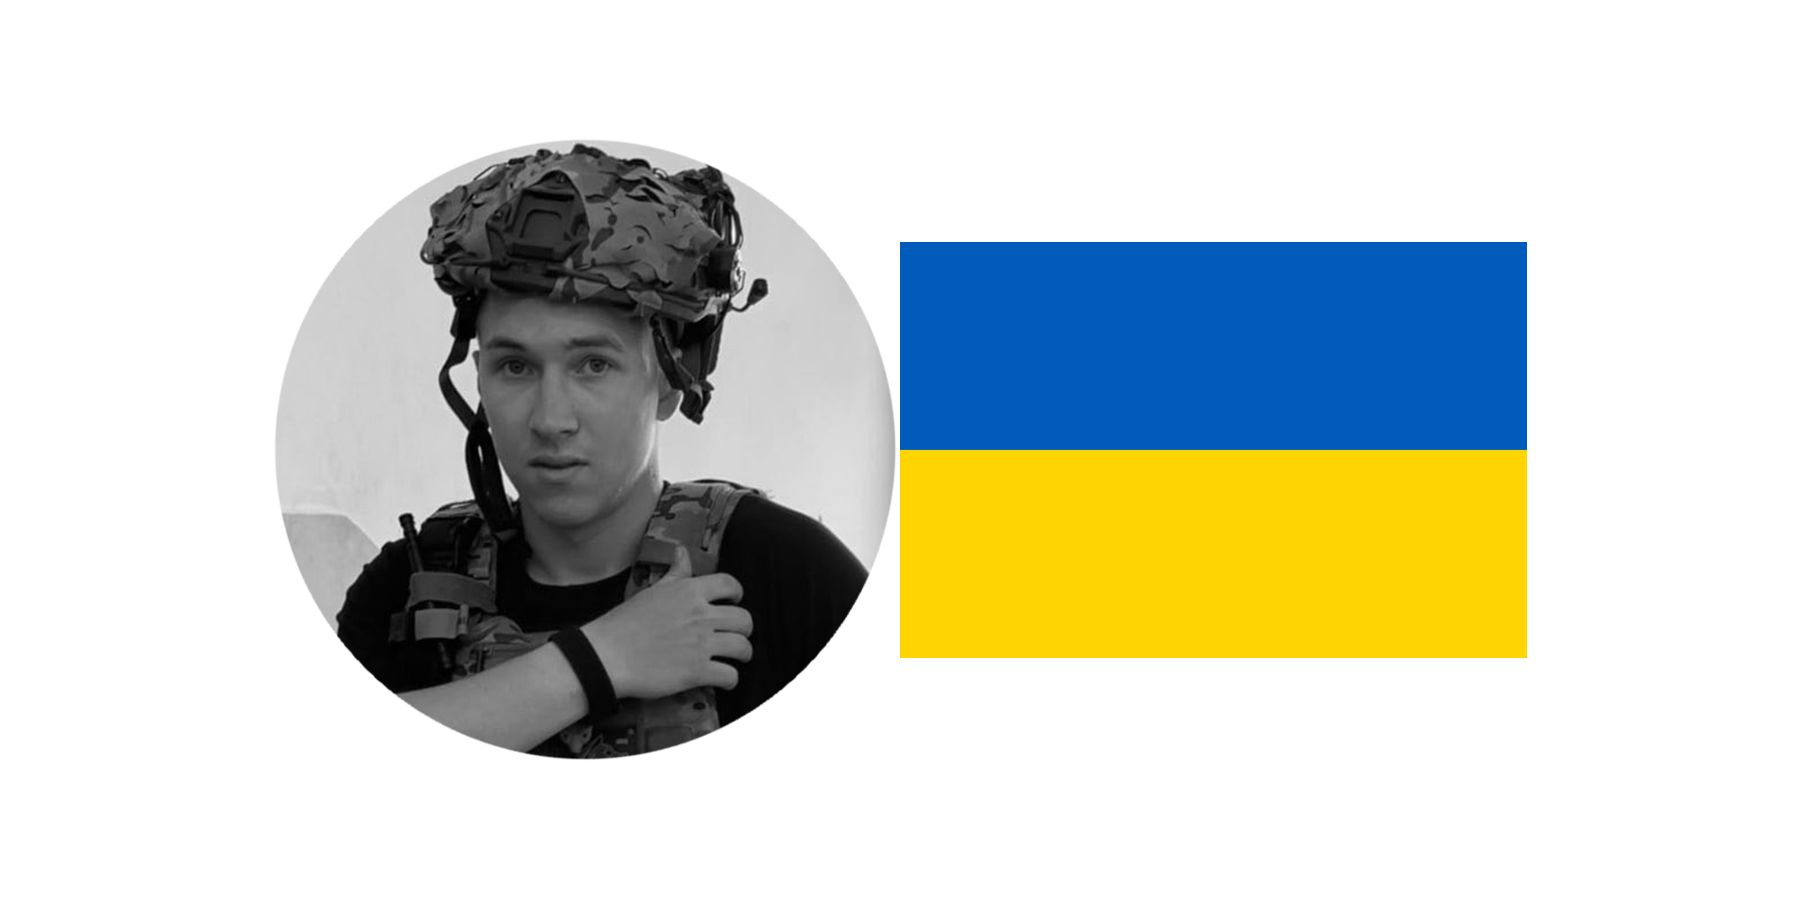 Ostap Oni Onistrat in military gear next to Ukraine flag on white background